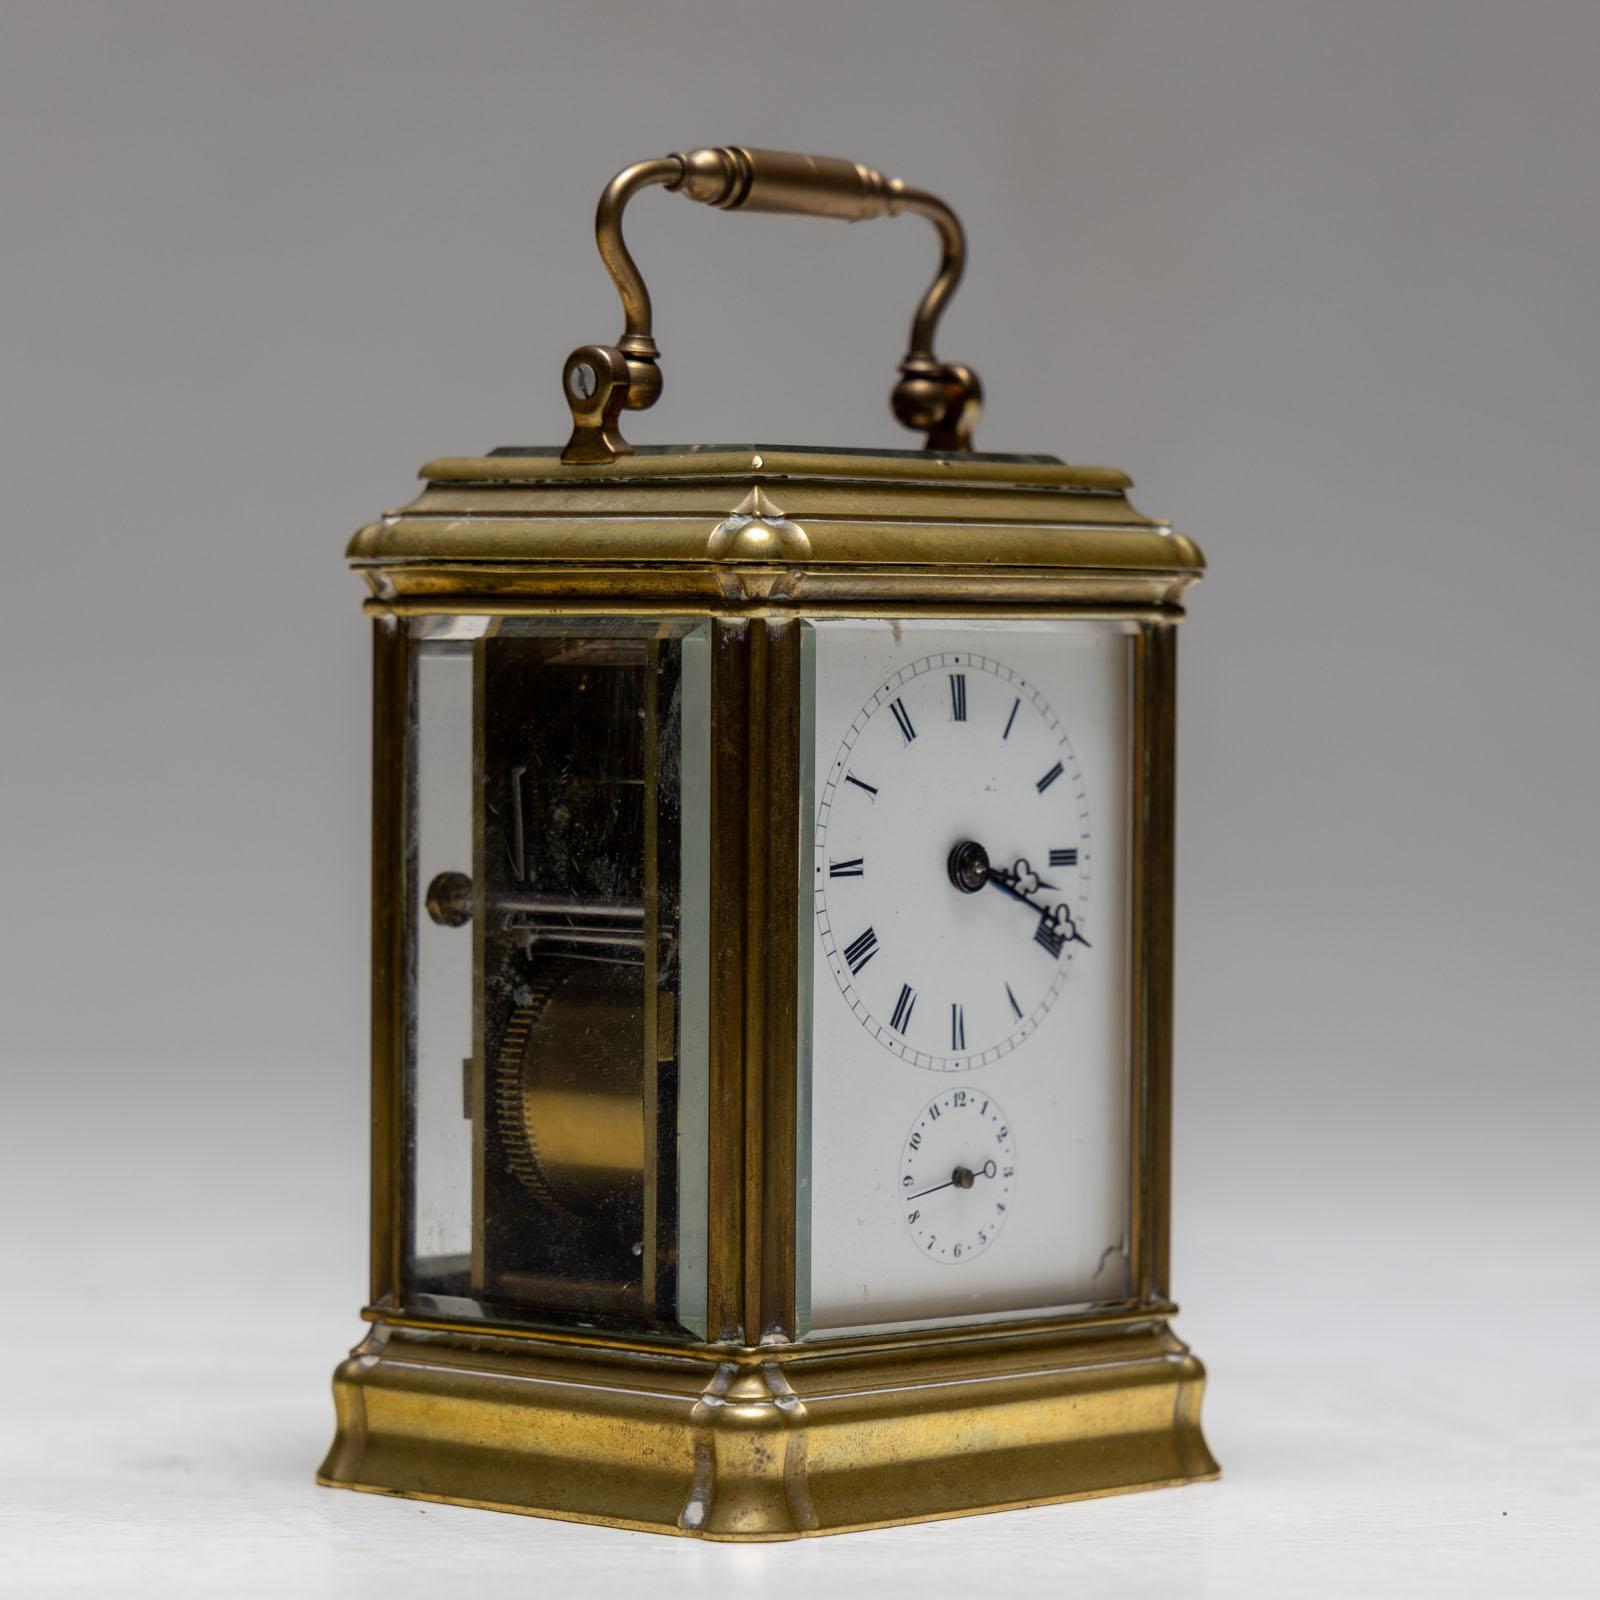 Small brass travel clock with curved handle and small profiled base. Signed Aiguilles on the movement.